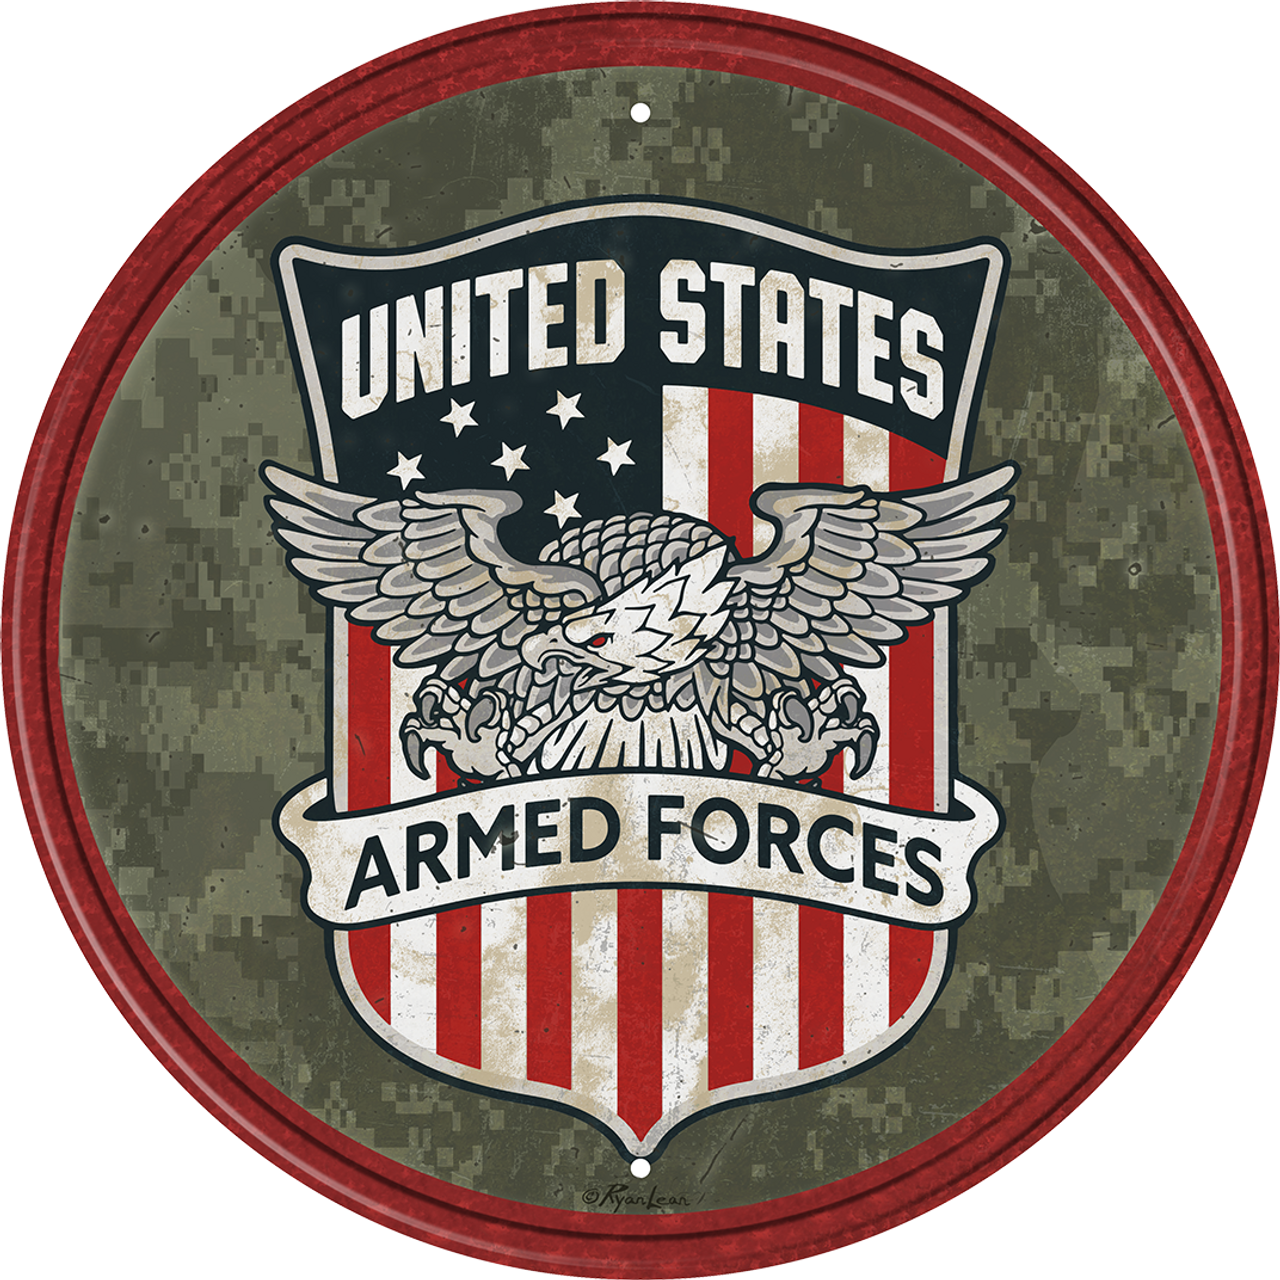 United States Armed Forces 11.75" Round Metal Tin Sign - 2626